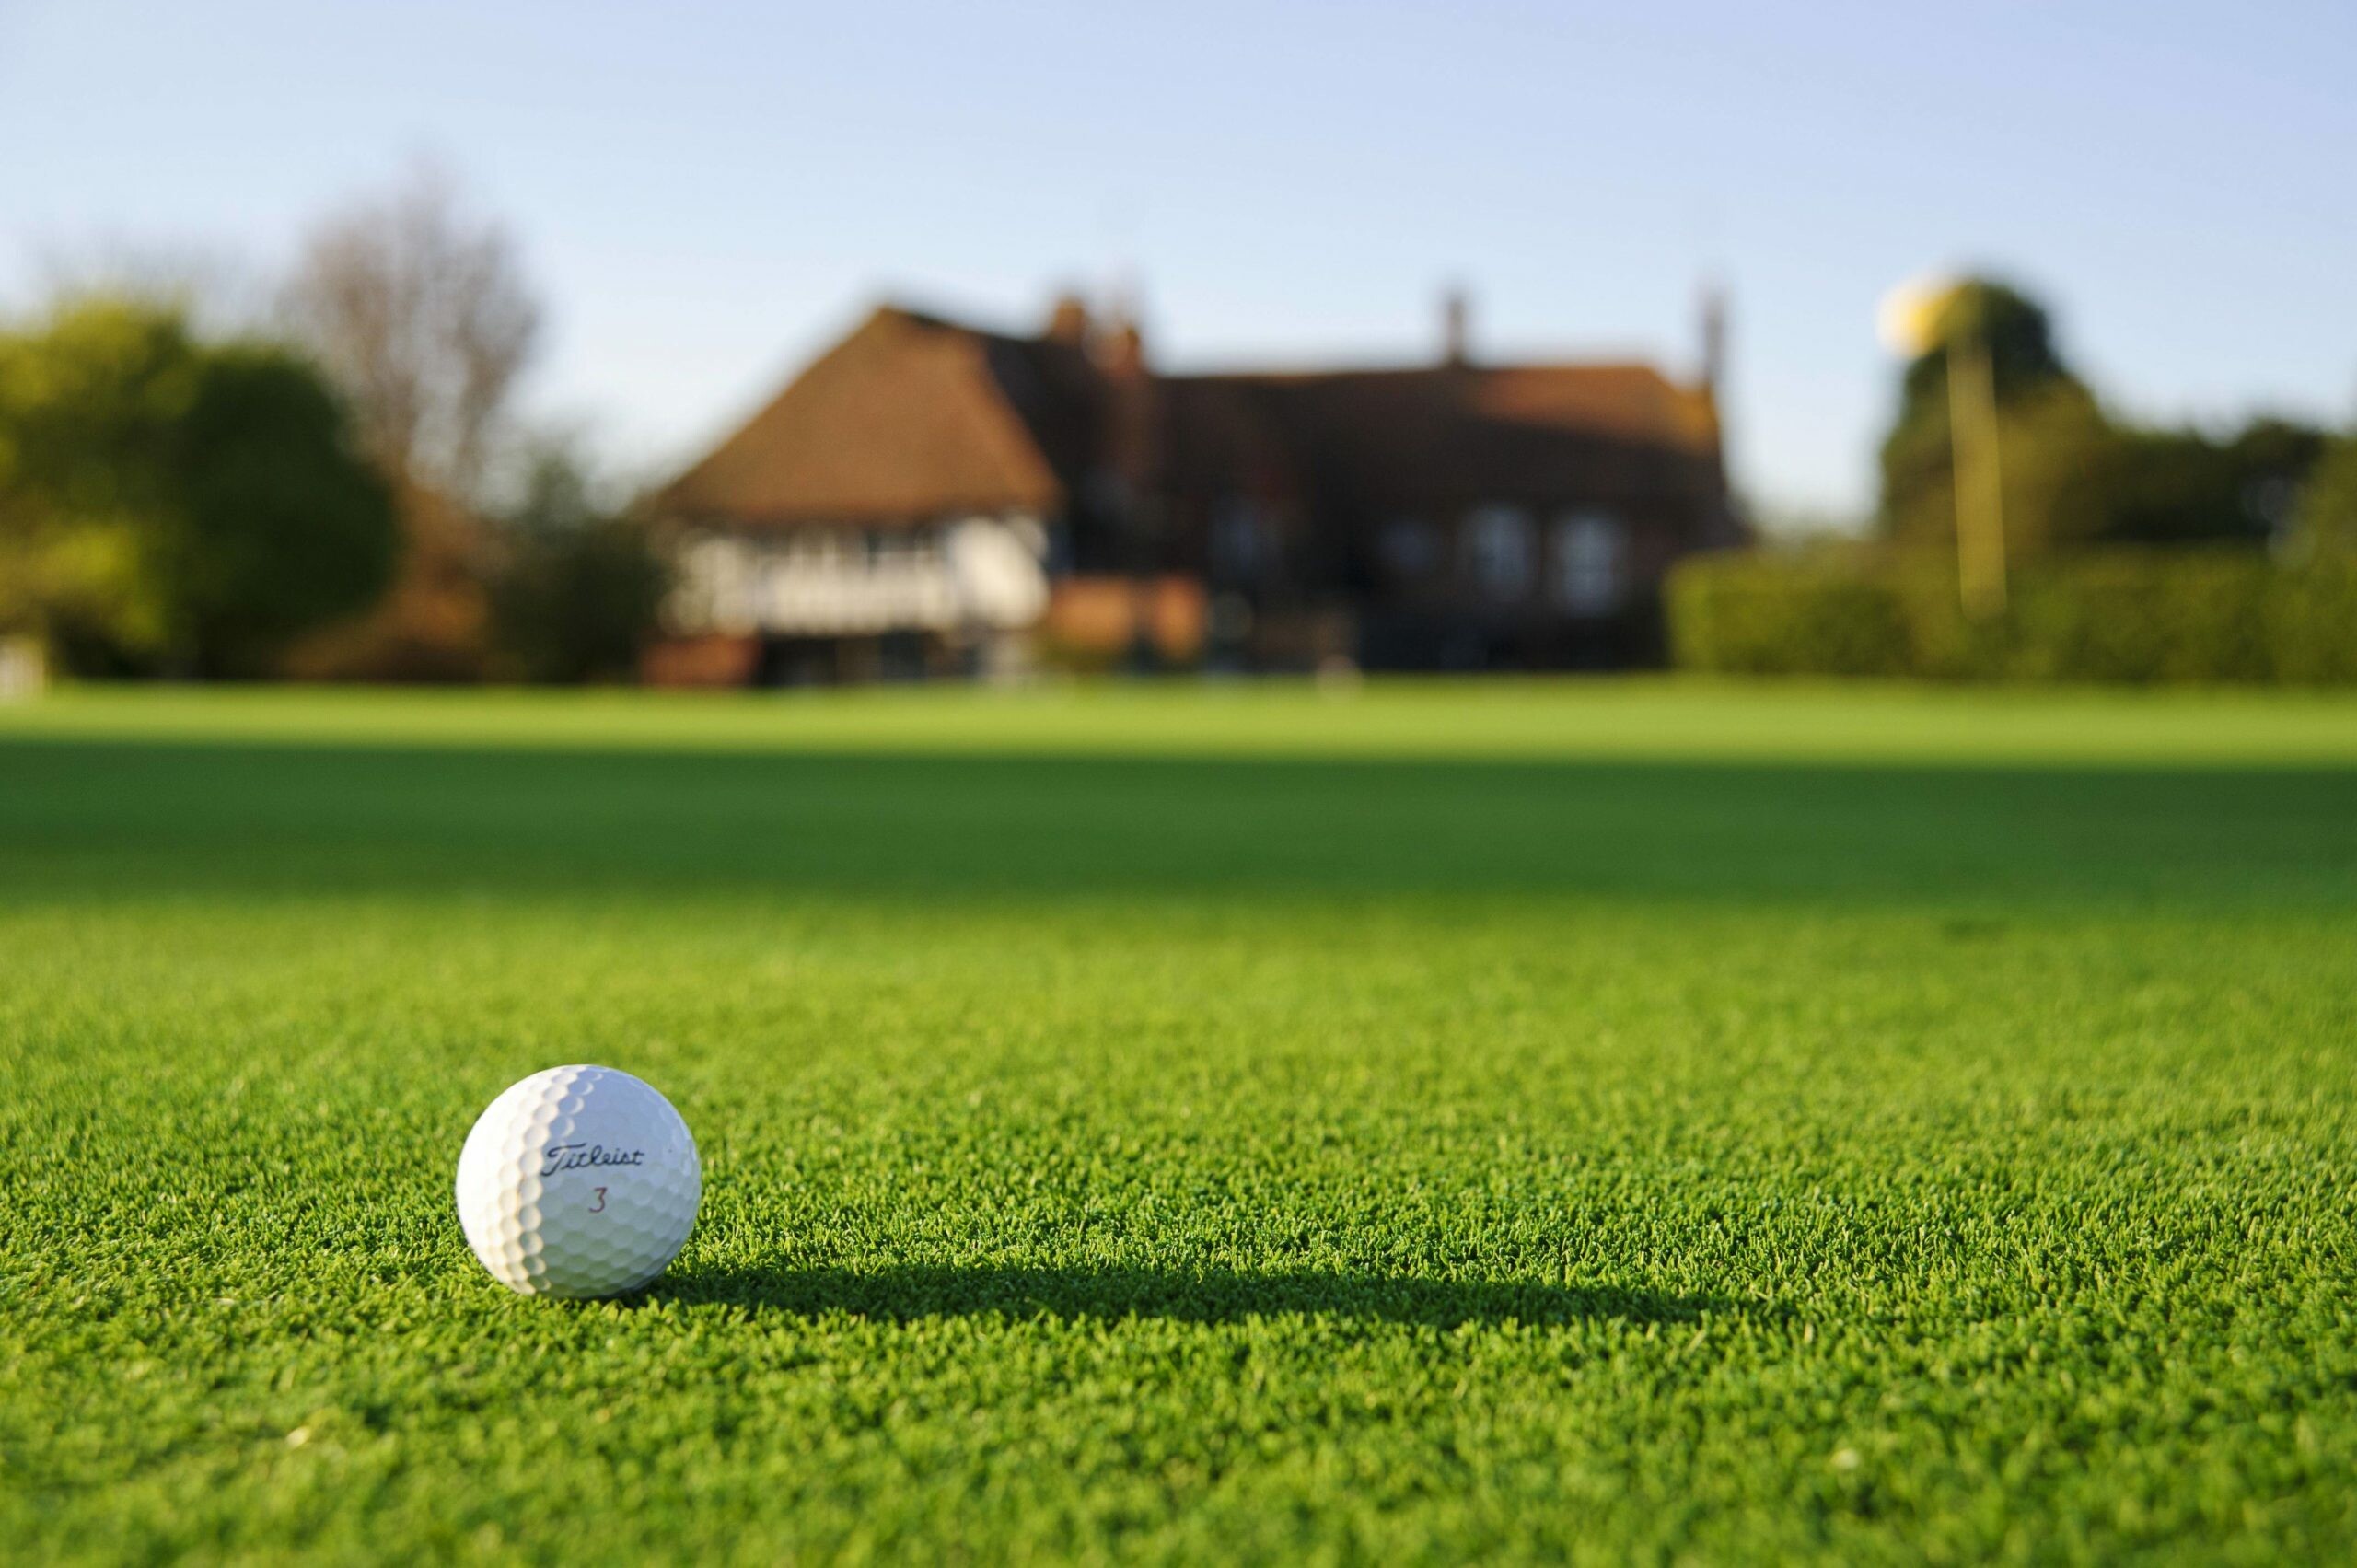 Golf: Ball game, A grass course that includes a tee box, fairway, and green. 2560x1710 HD Wallpaper.